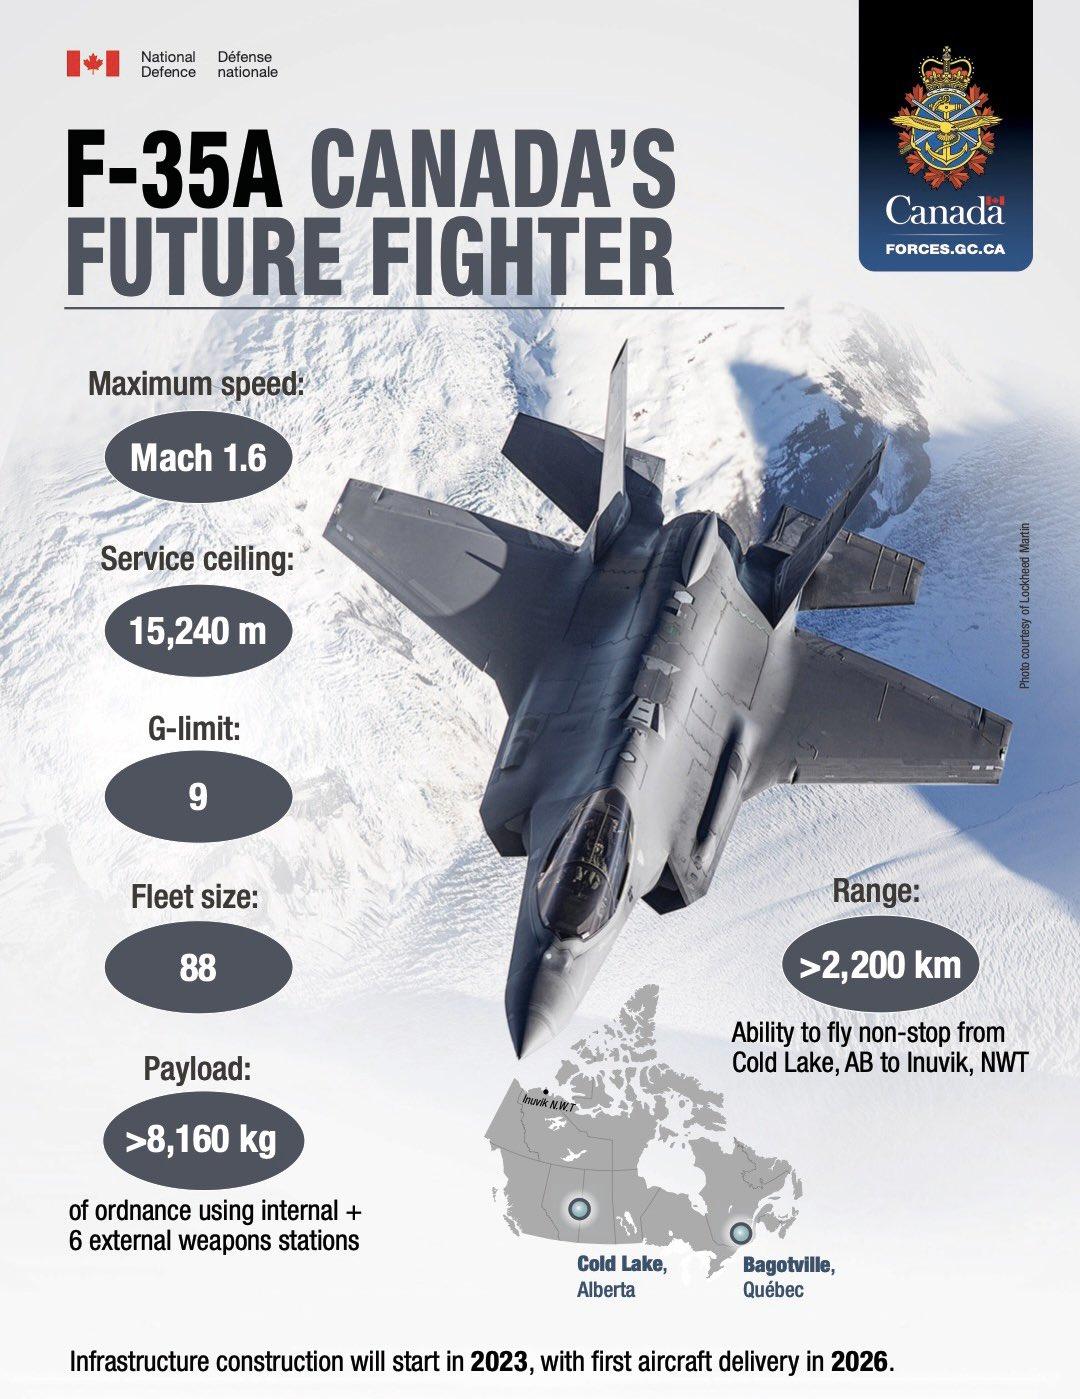 The Canadian government selected the F-35 as its future fighter, strengthening allied airpower in Canada, North America and around the world.